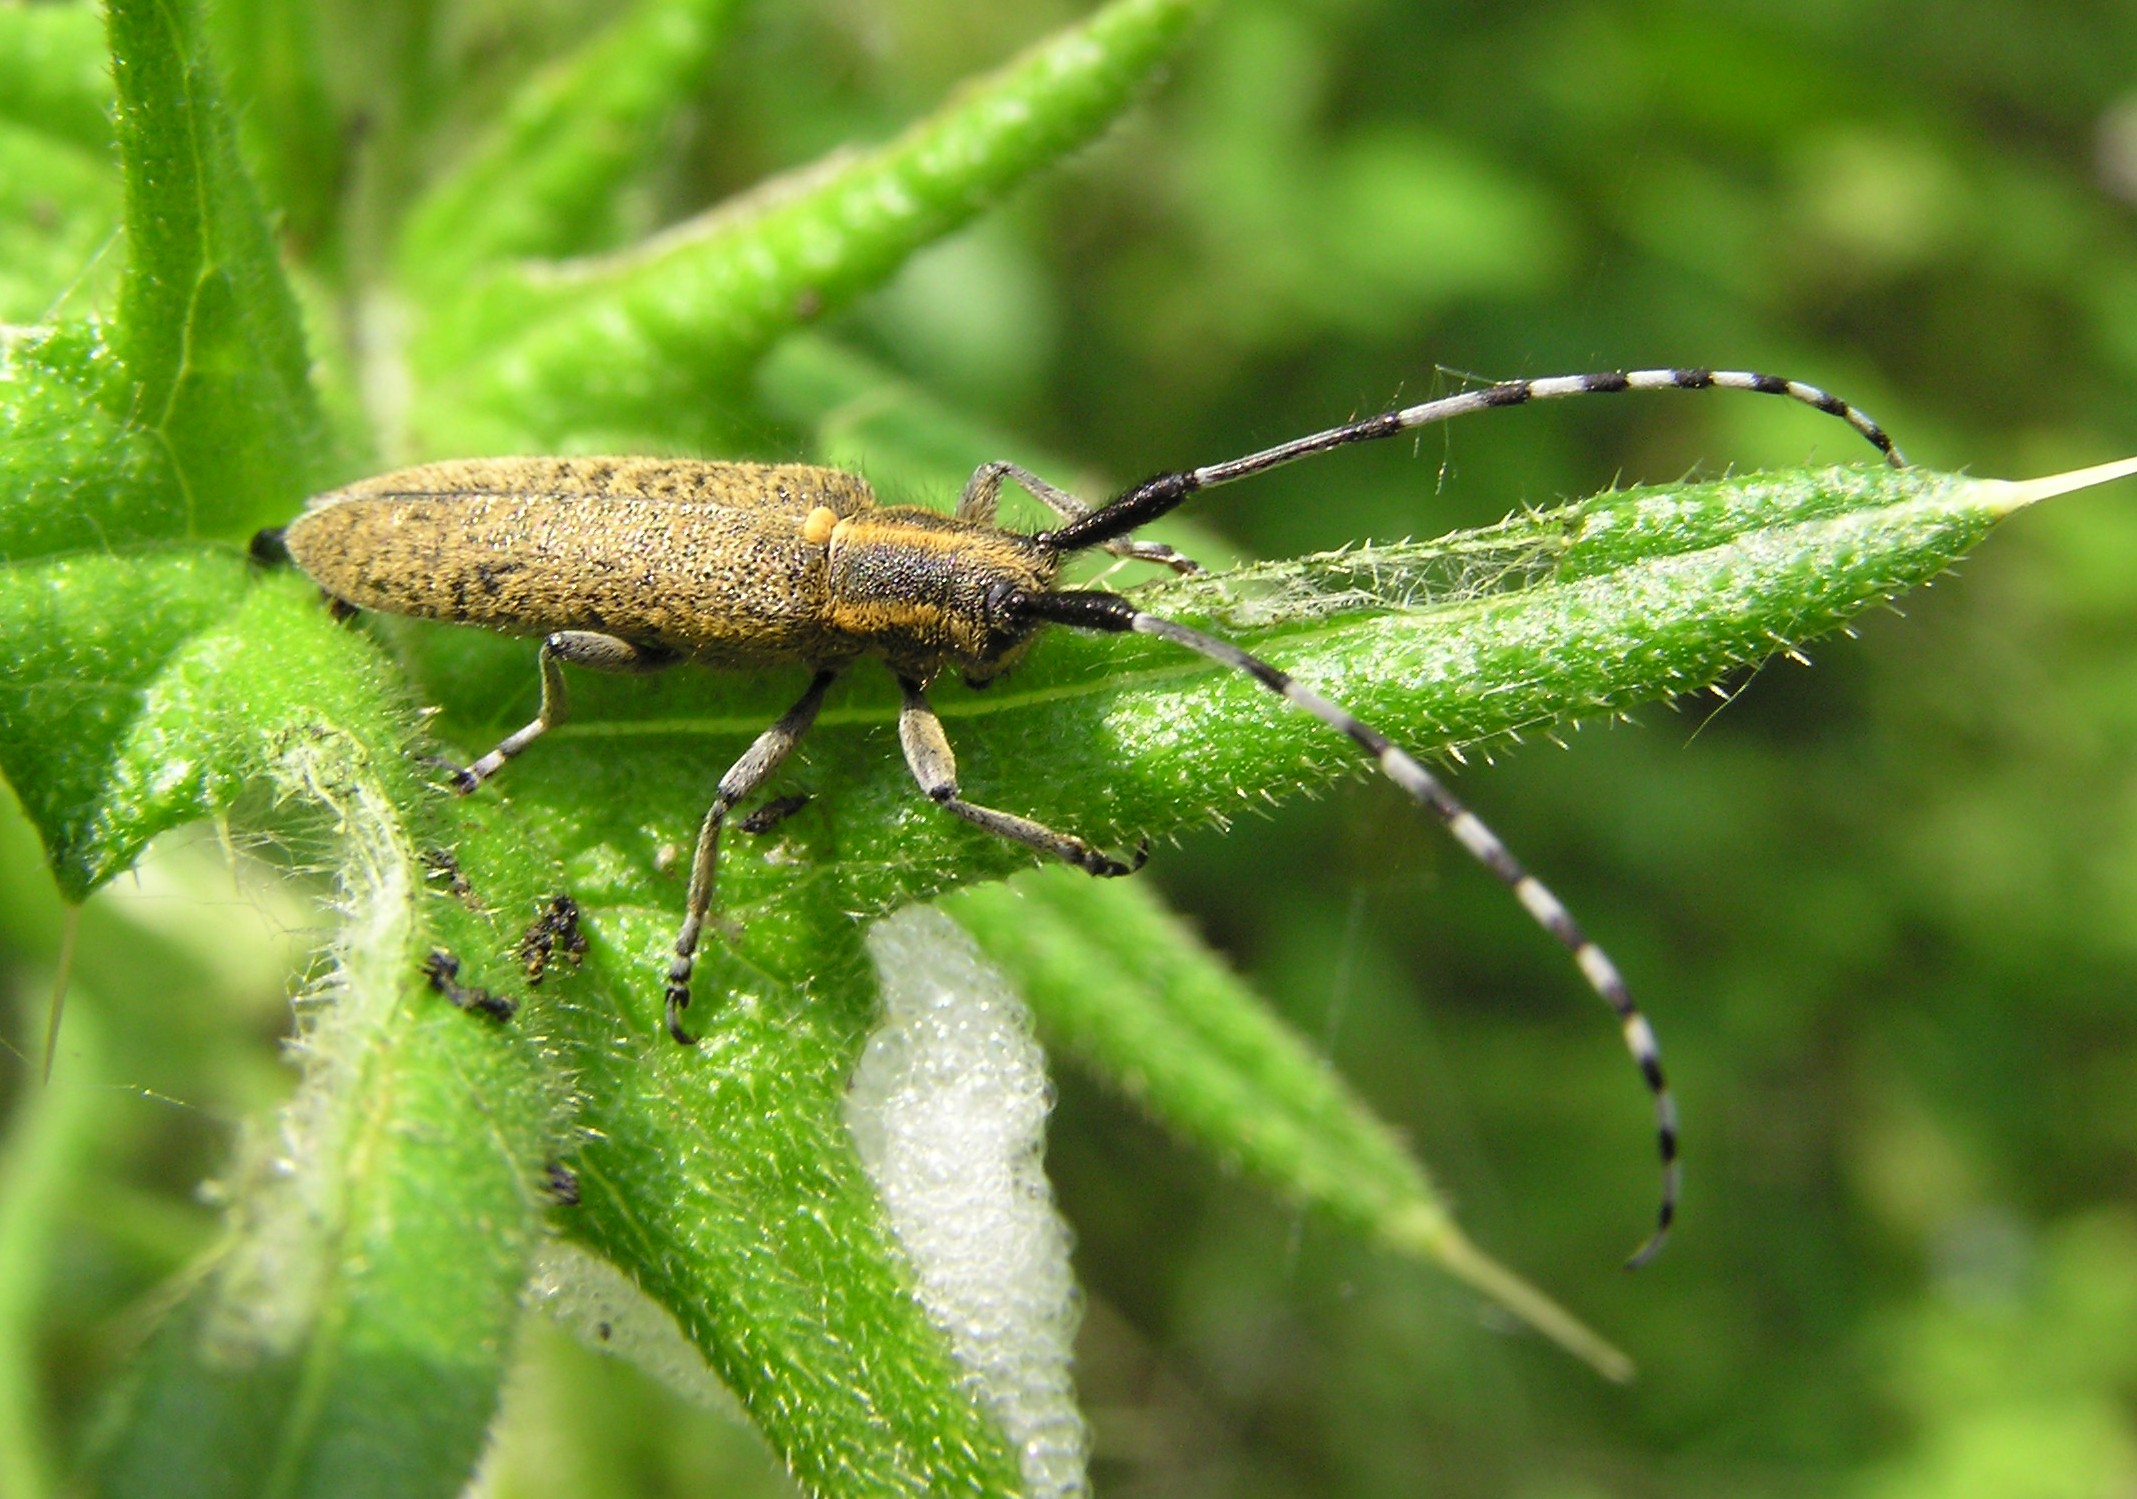 Agapanthia villosoviridescens is a locally uncommon longhorn beetle. The first specimen for the parish was found in June 2012 on the outskirts of the wood and was then only the third record for VC64.